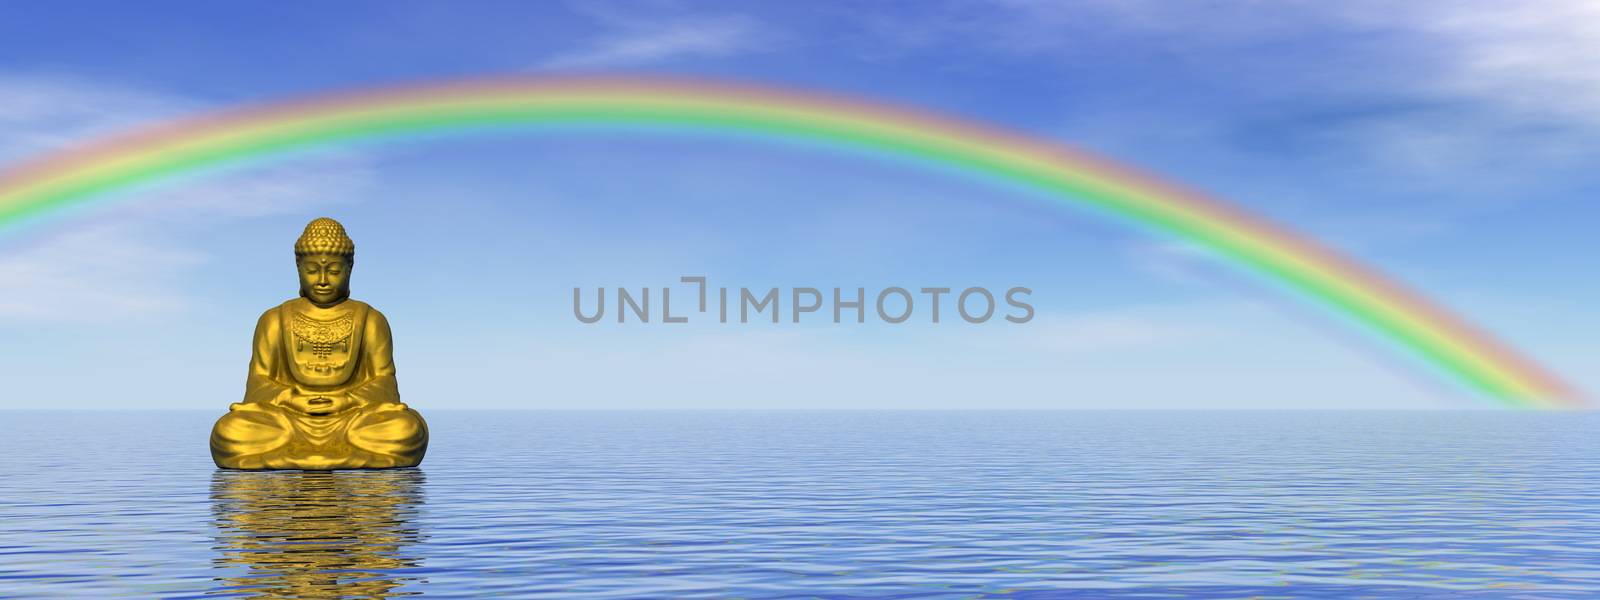 Small golden buddha meditating under rainbow and upon water by day - 3D render